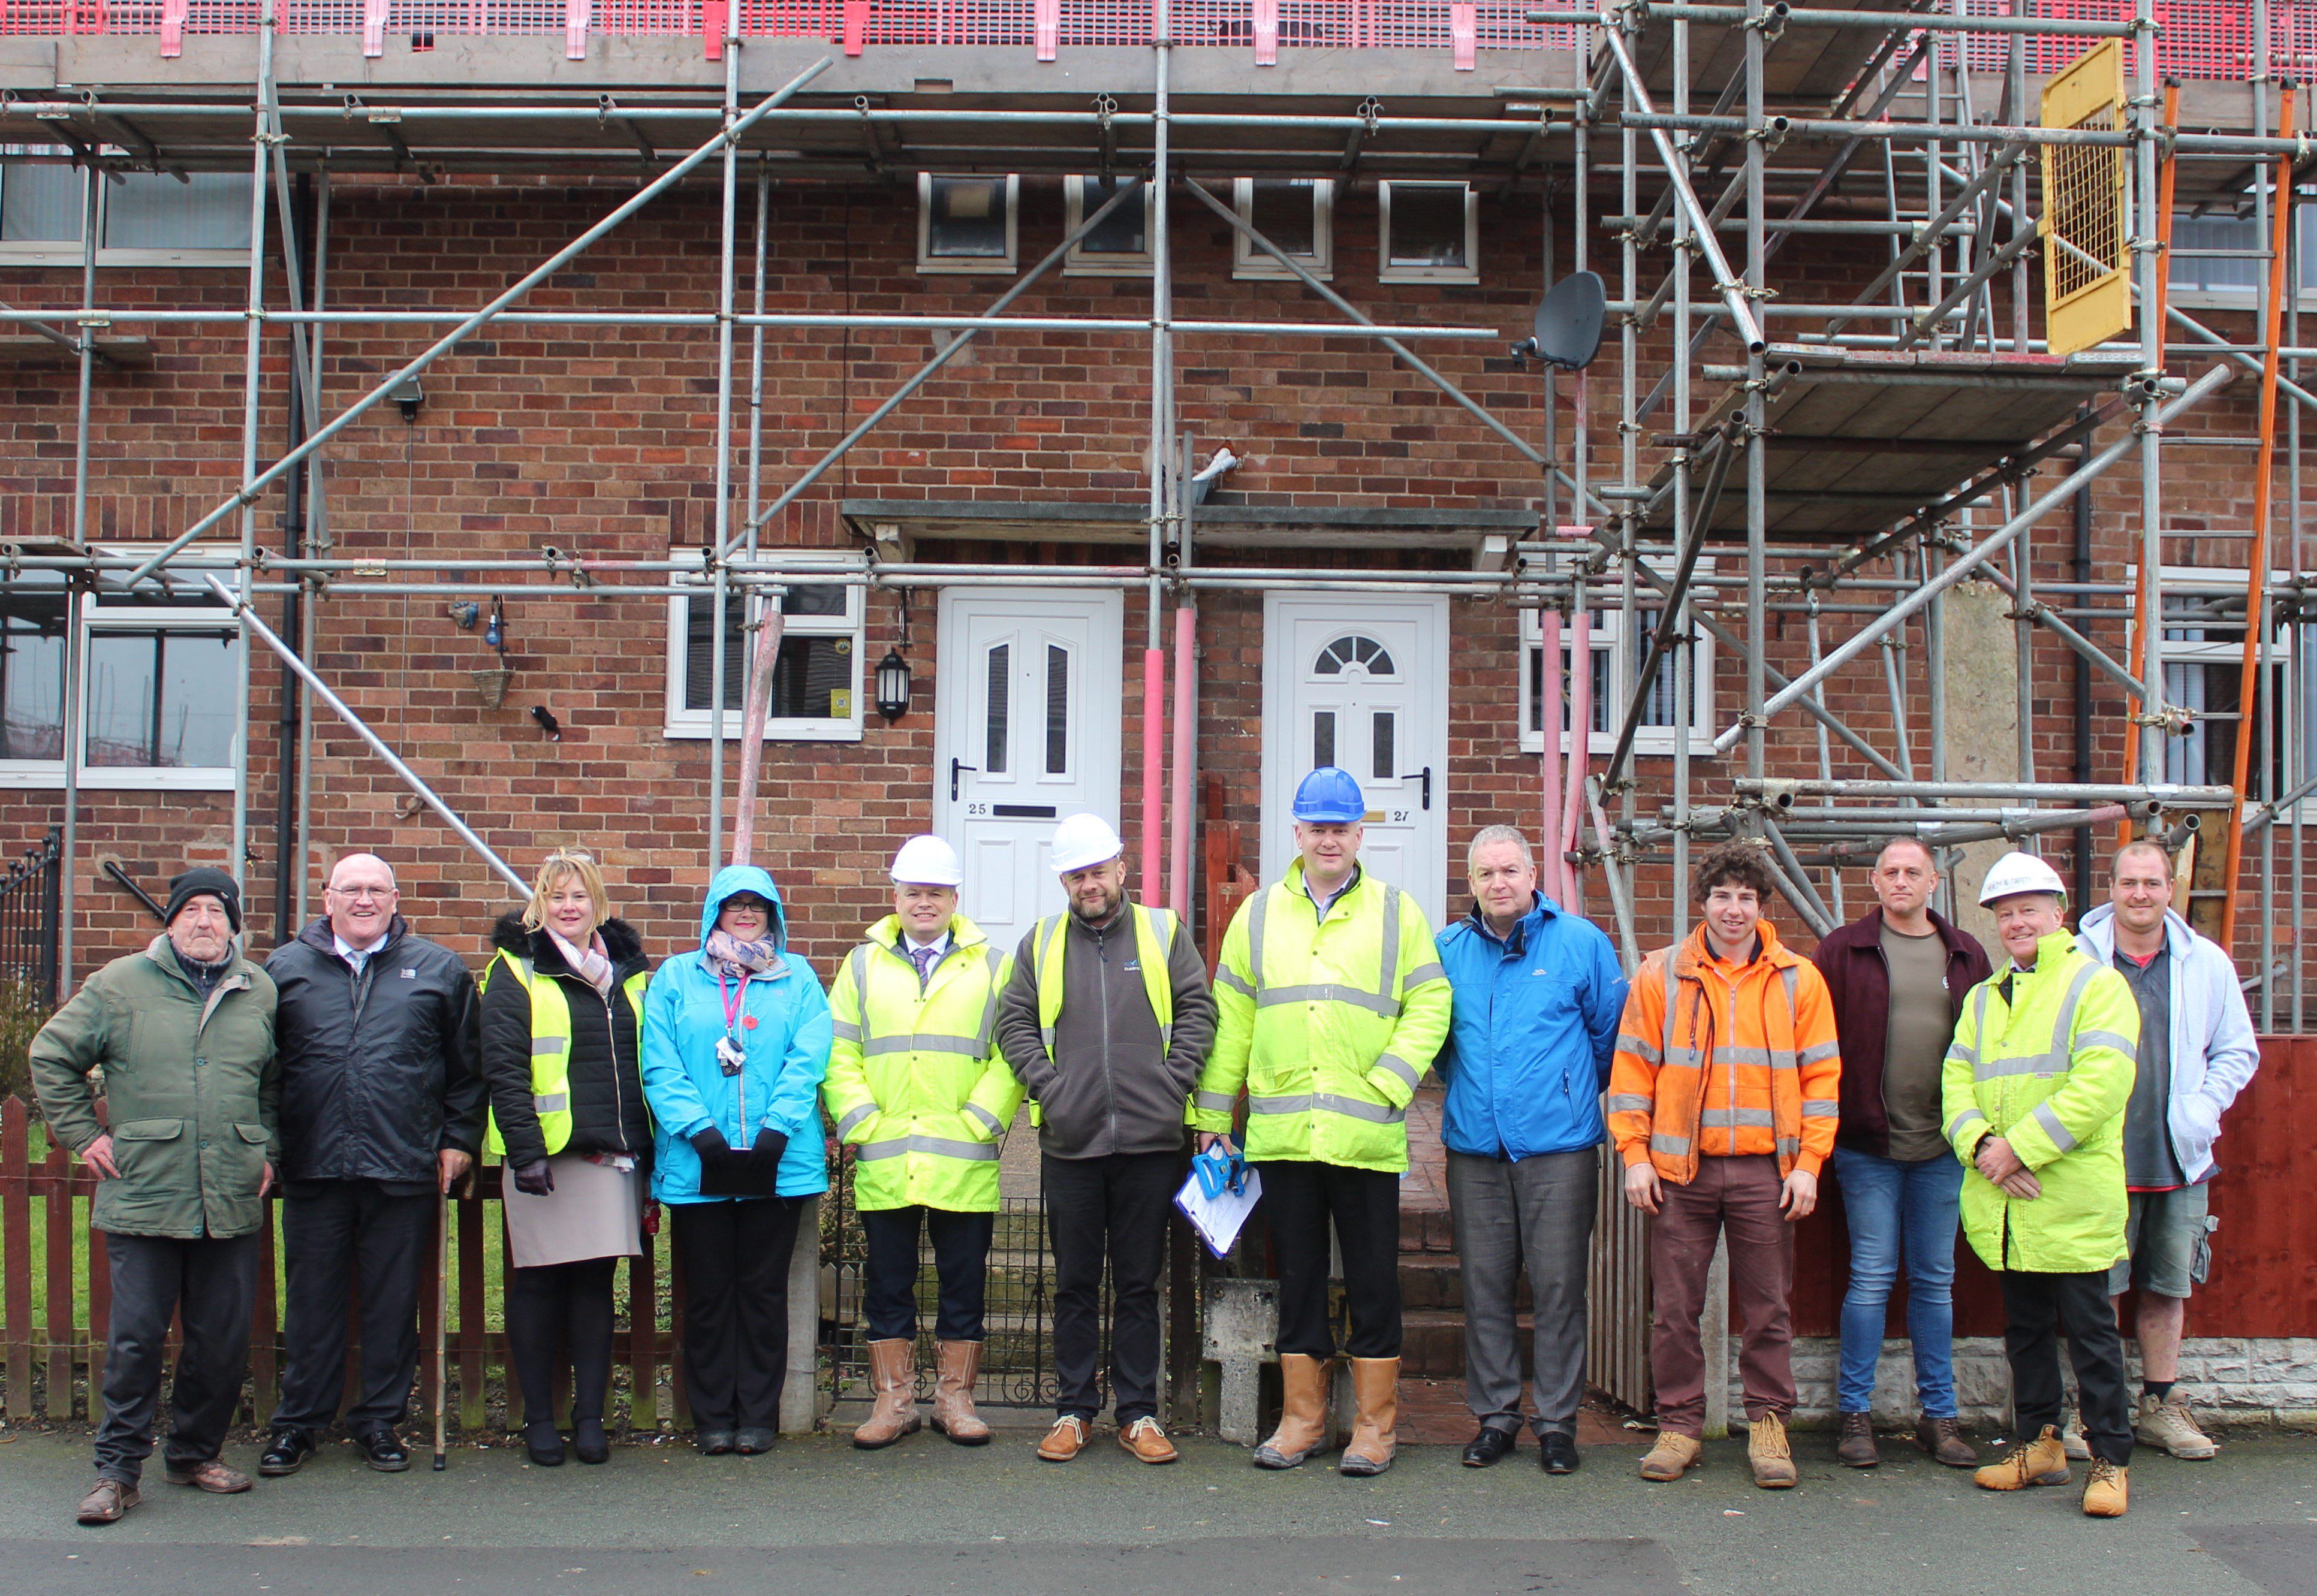 Council tenants welcome our housing modernisation project